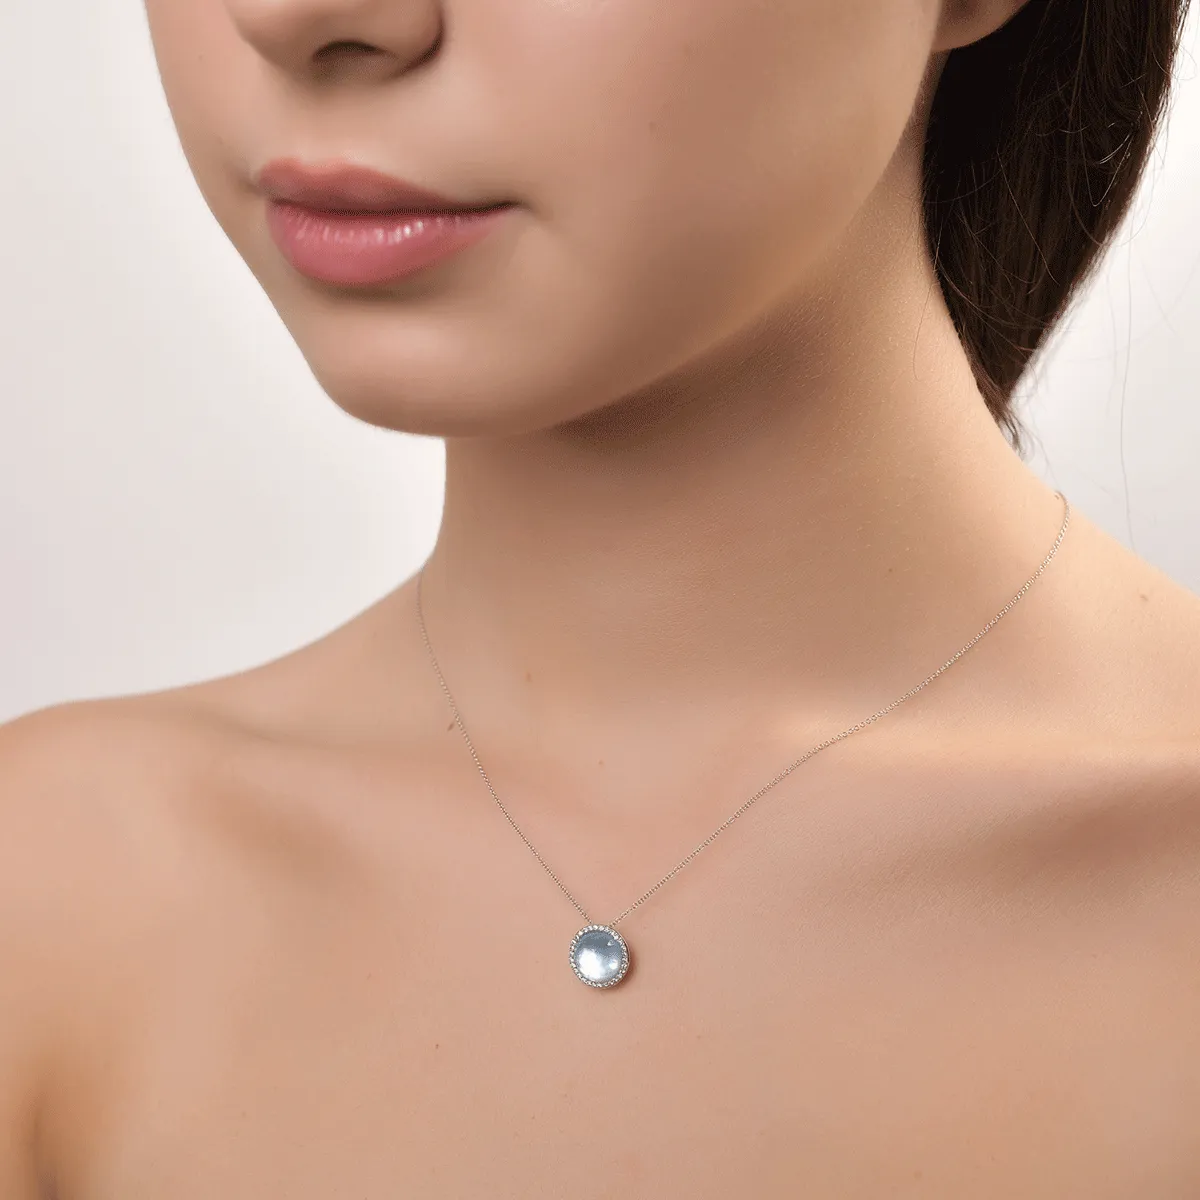 18K white gold pendant chain with 3.487ct light blue topaz and 0.11ct diamonds